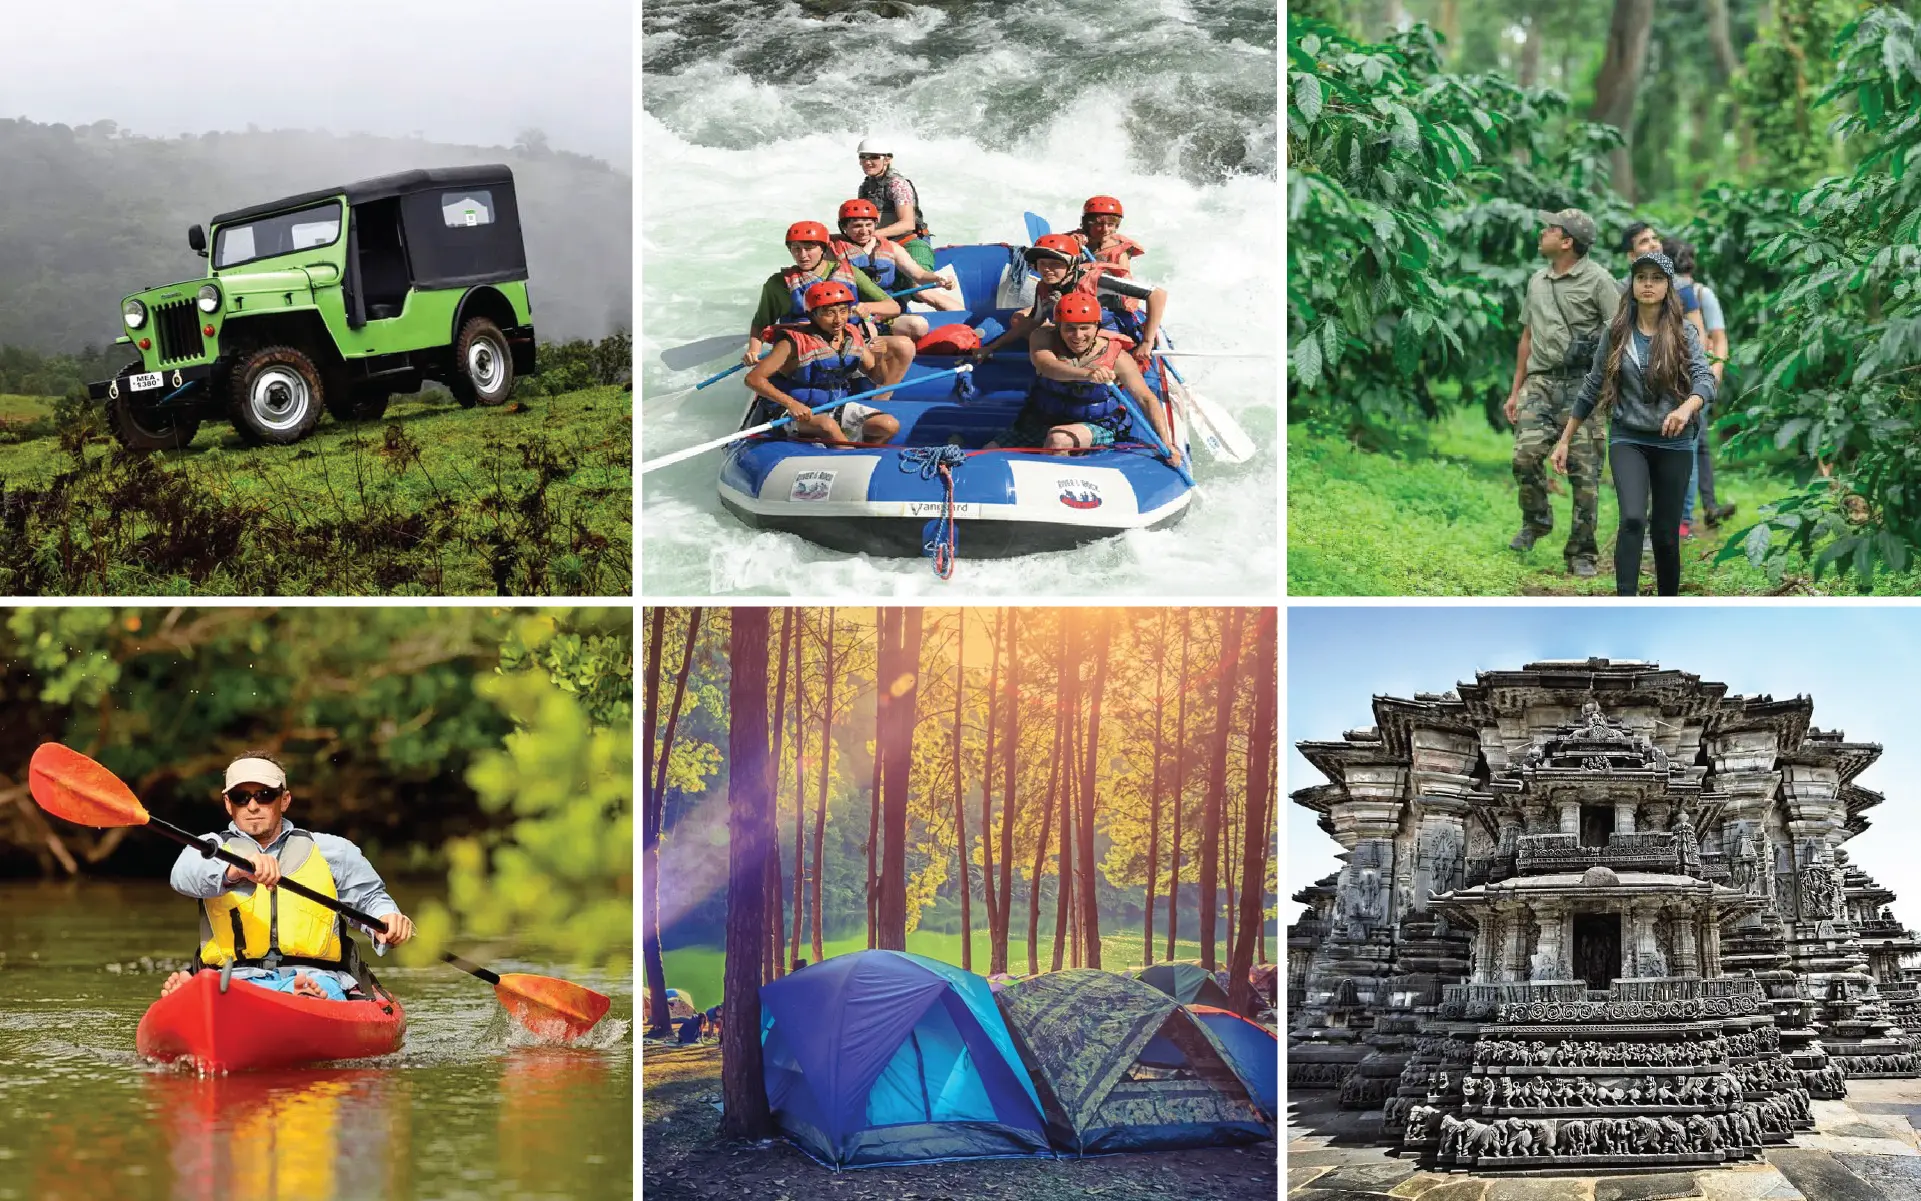 All poppular Offbeat activities to do in Chikmagalur